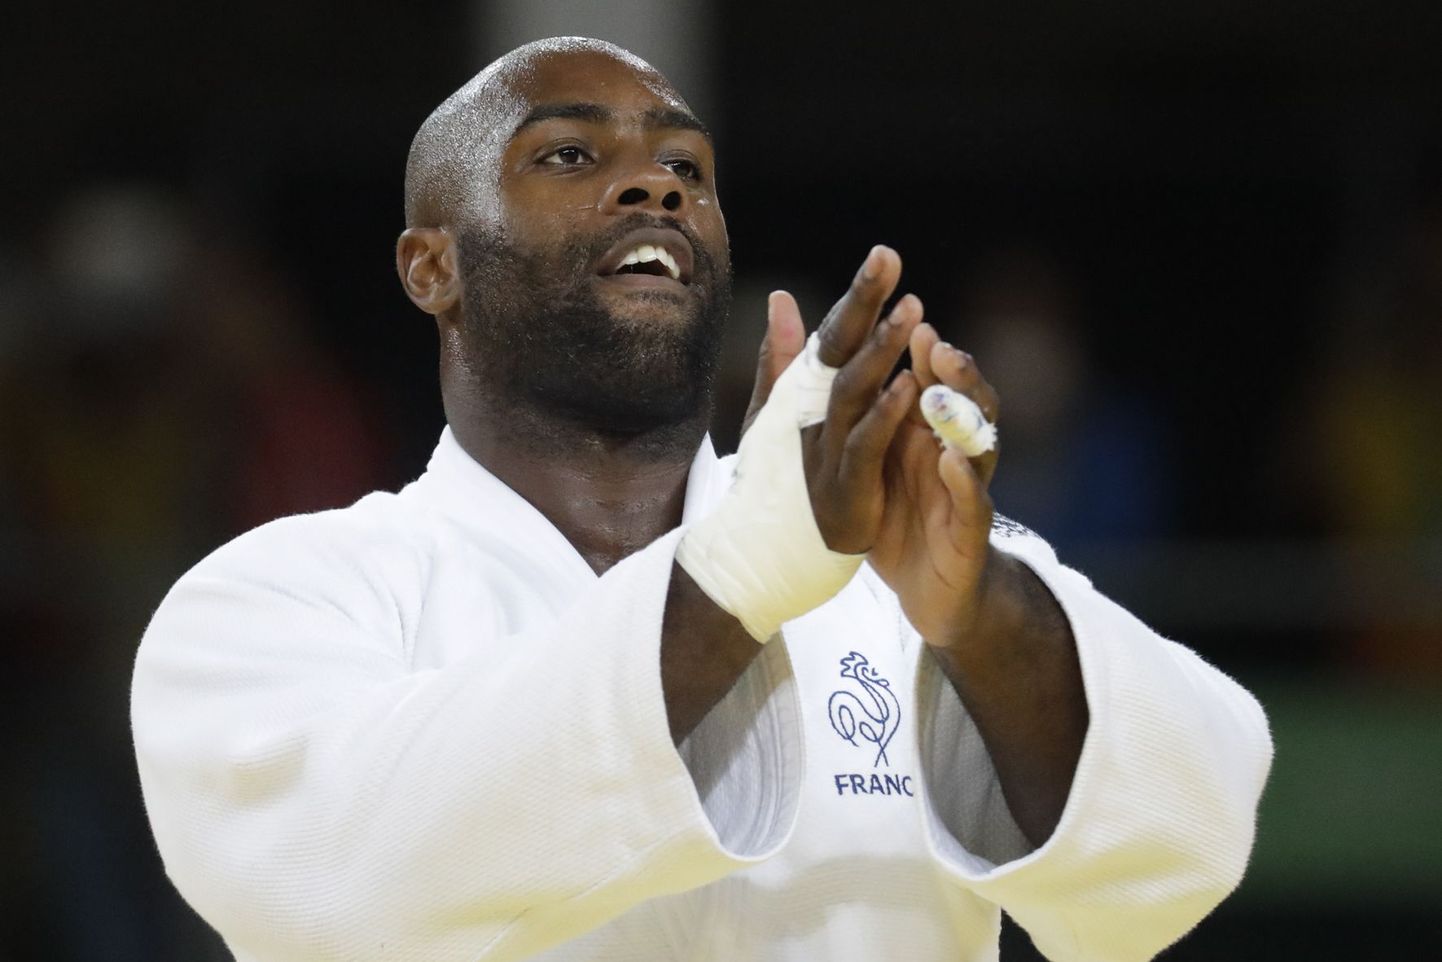 France's Teddy Riner reacts after winning the gold medal during the men's over 100-kg judo competition at the 2016 Summer Olympics in Rio de Janeiro, Brazil, Friday, Aug. 12, 2016. (AP Photo/Markus Schreiber)